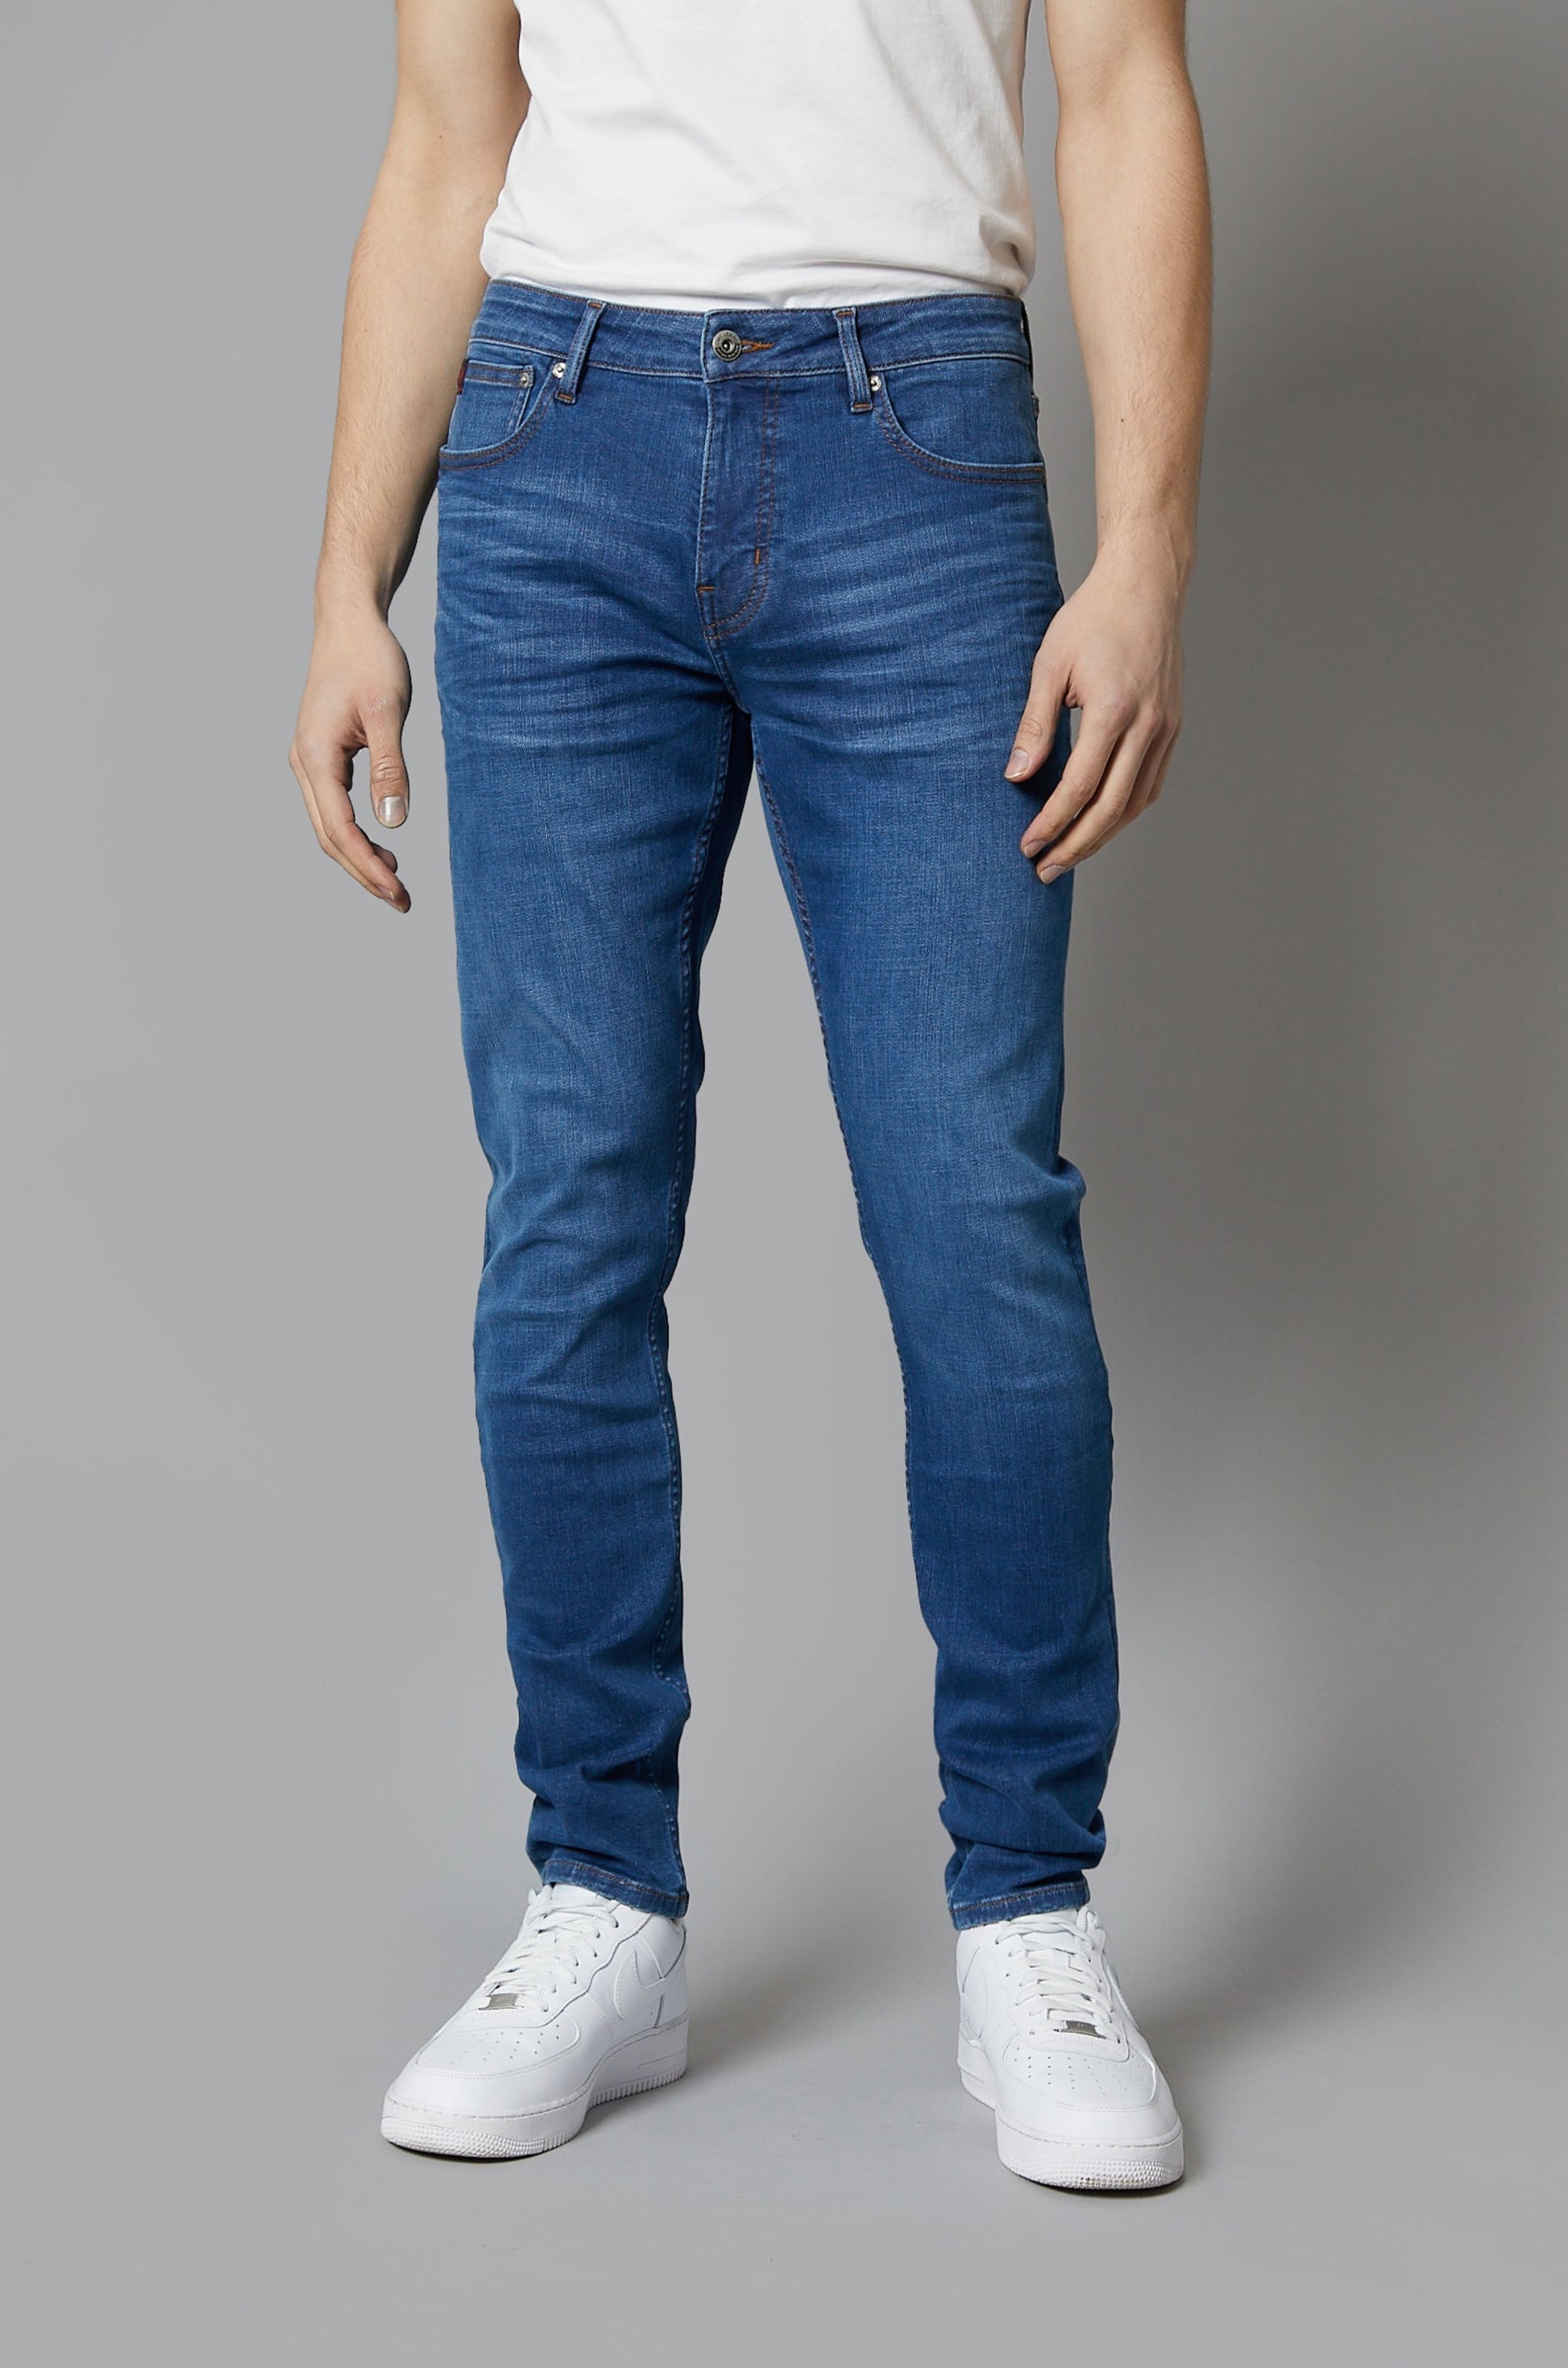 DML Jeans Florida Tapered Fit Jeans In Mid Blue